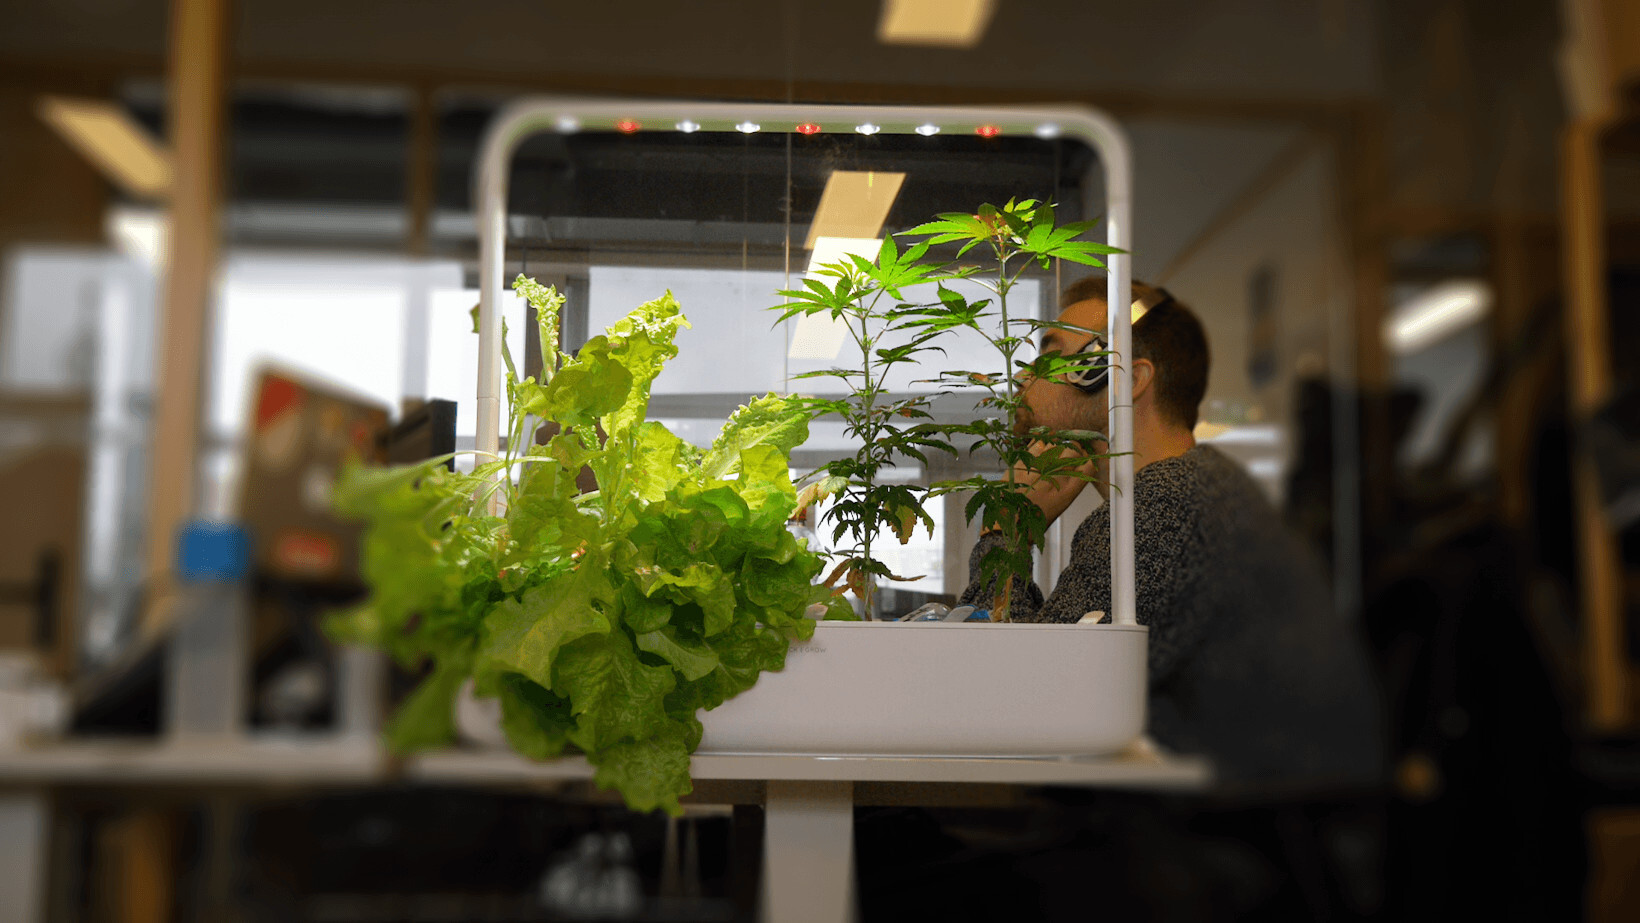 Video: We grew weed in our office with this ~high~ tech smart garden